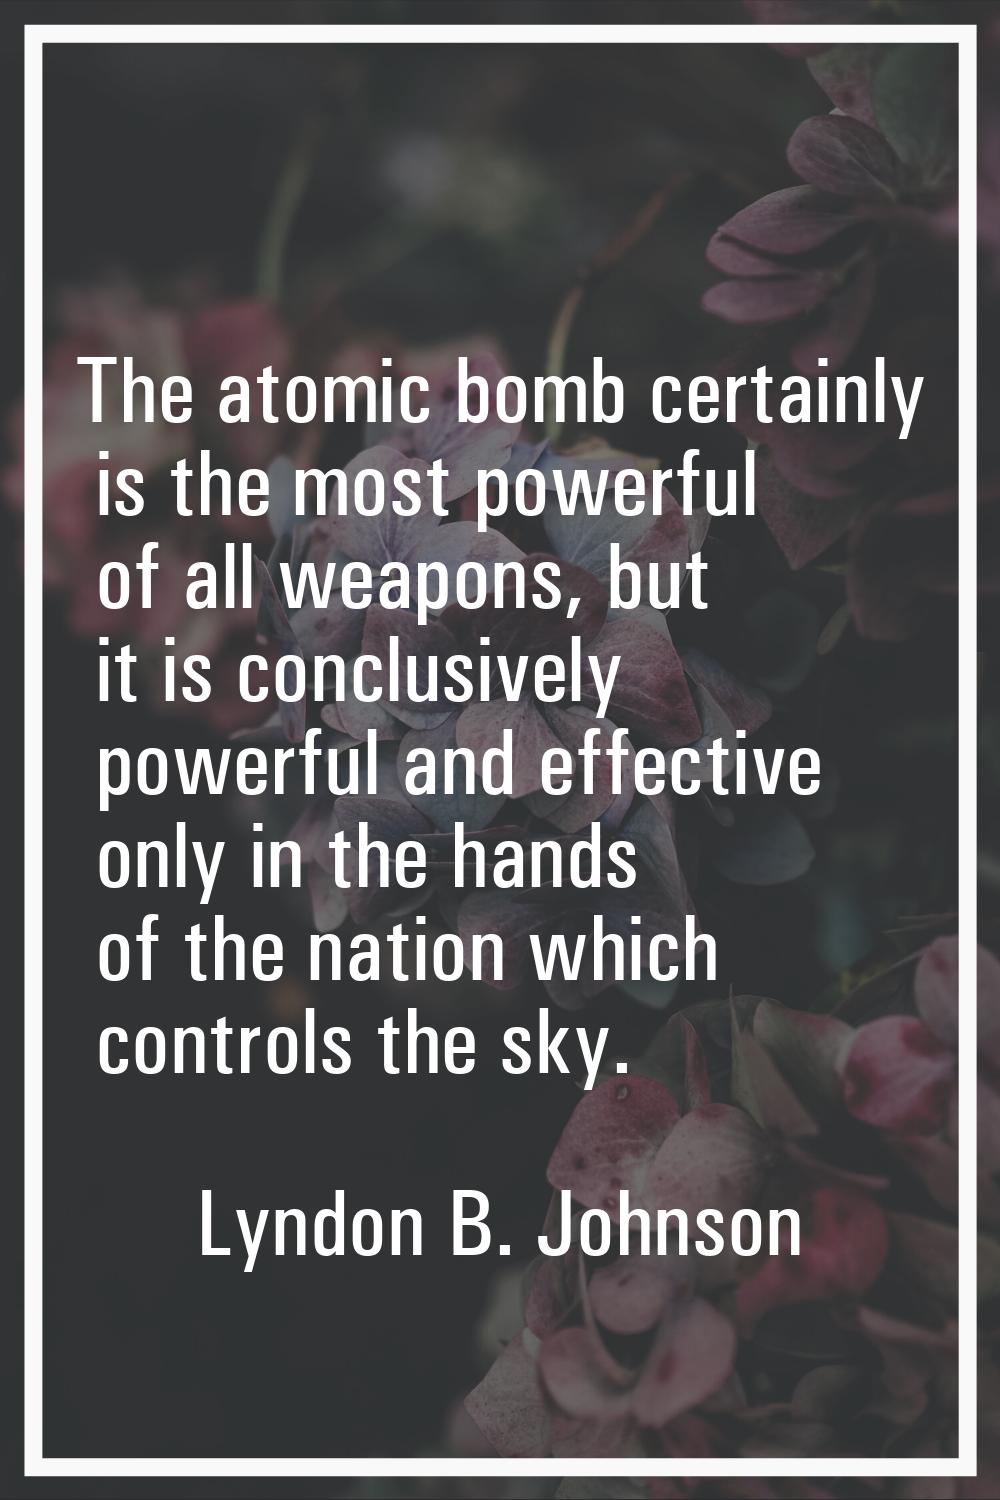 The atomic bomb certainly is the most powerful of all weapons, but it is conclusively powerful and 